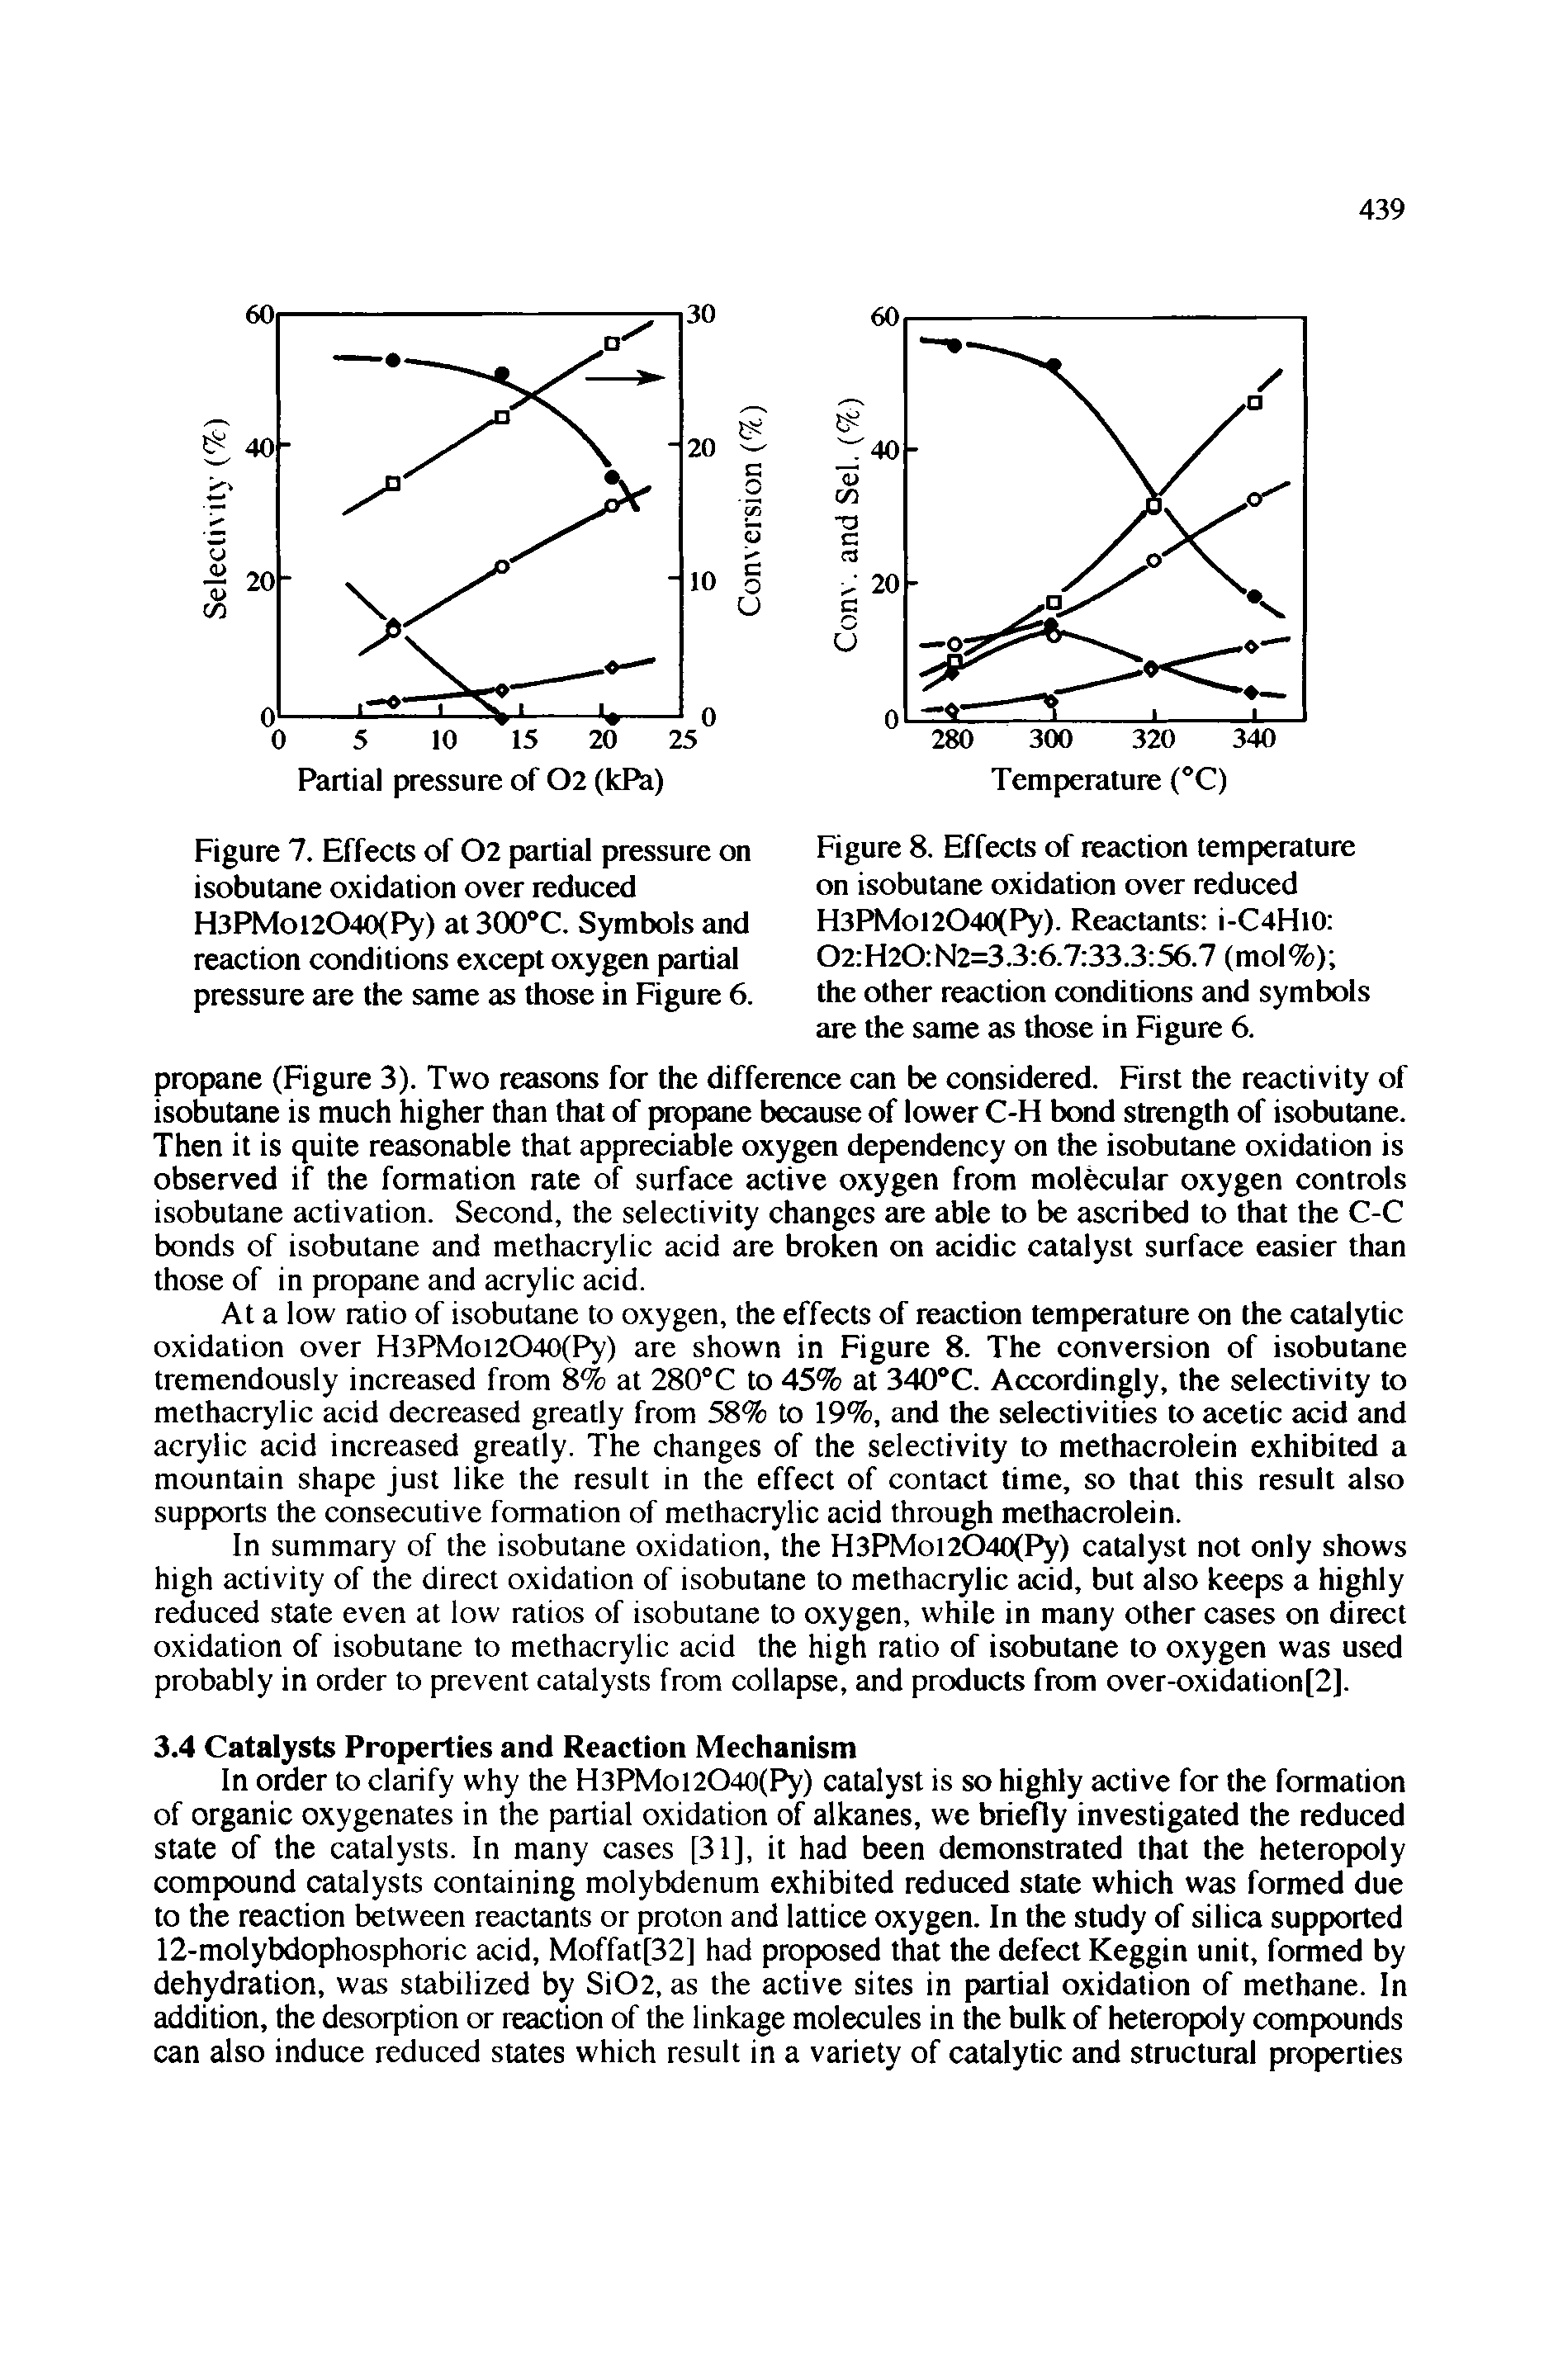 Figure 7. Effects of 02 partial pressure on isobutane oxidation over reduced H3PMol2O40(Py) at 300°C. Symbols and reaction conditions except oxygen partial pressure are the same as those in Figure 6.